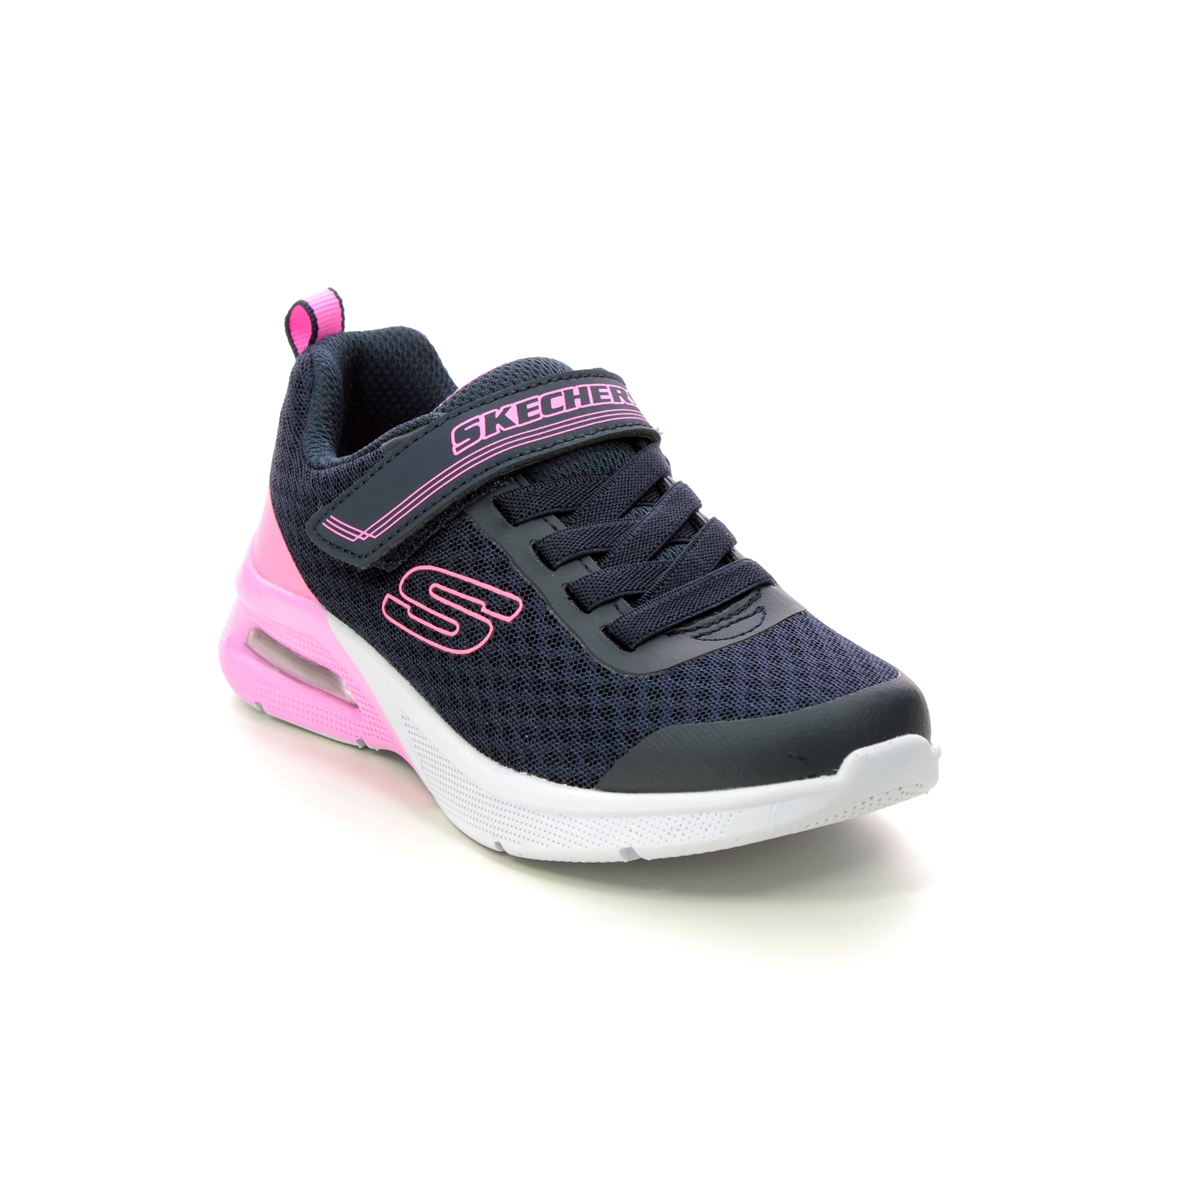 Skechers Microspec Max Bungee Navy Kids Girls Trainers 302343L In Size 28 In Plain Navy For kids